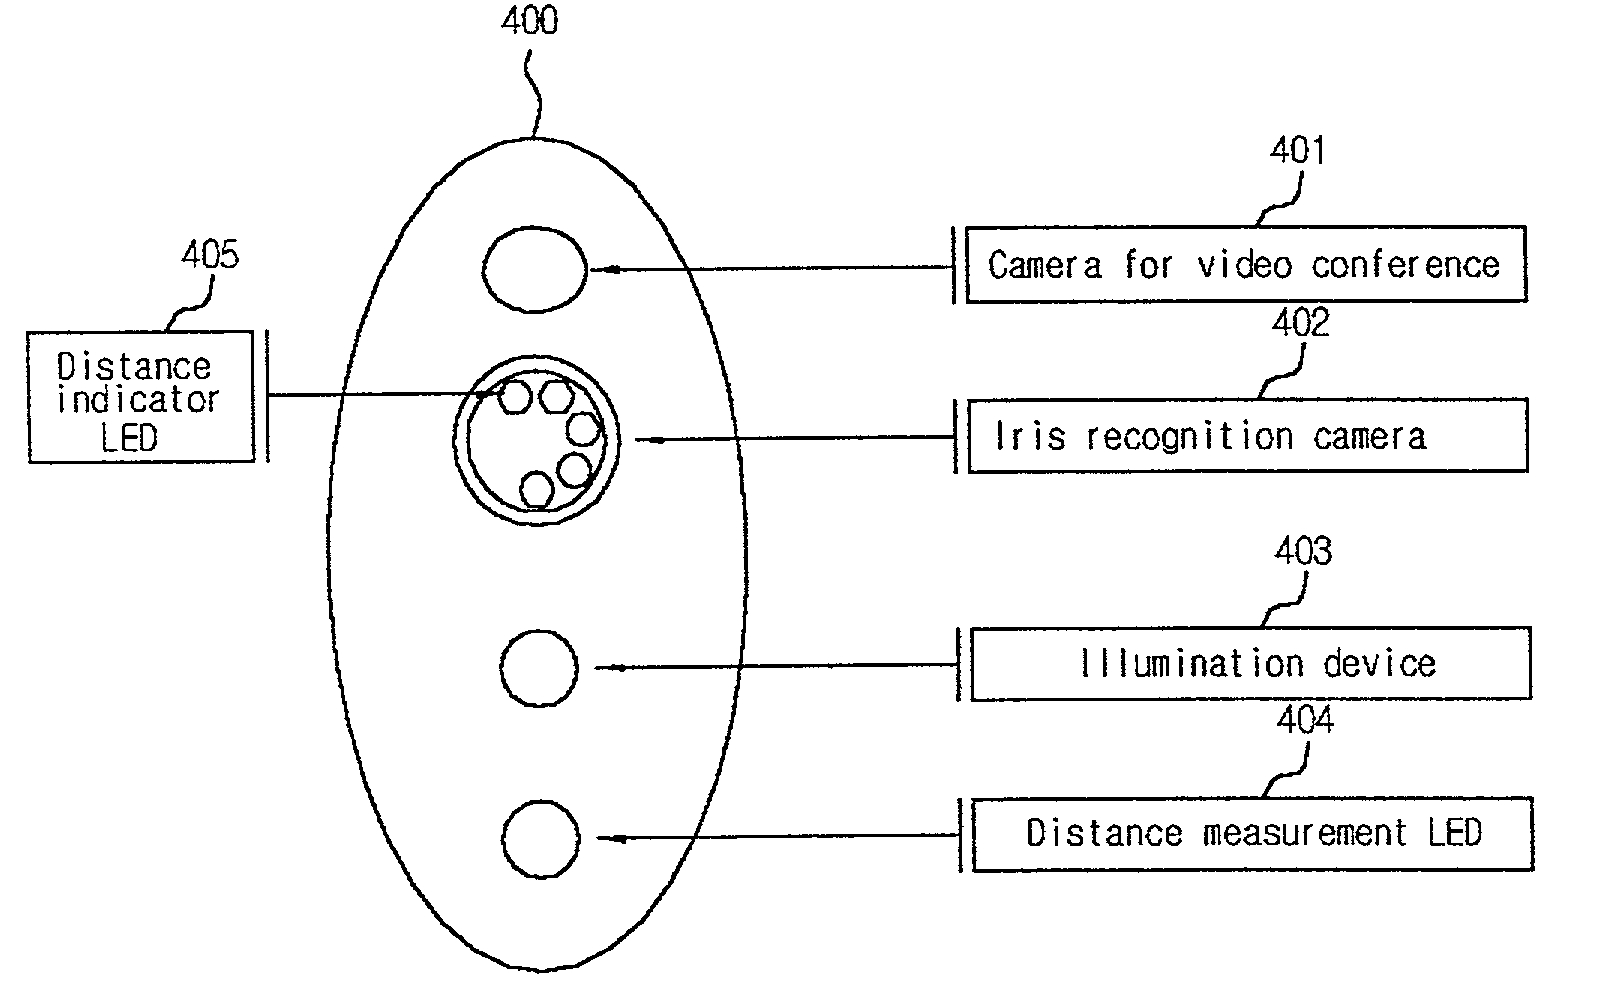 Display device of focal angle and focal distance in iris recognition system